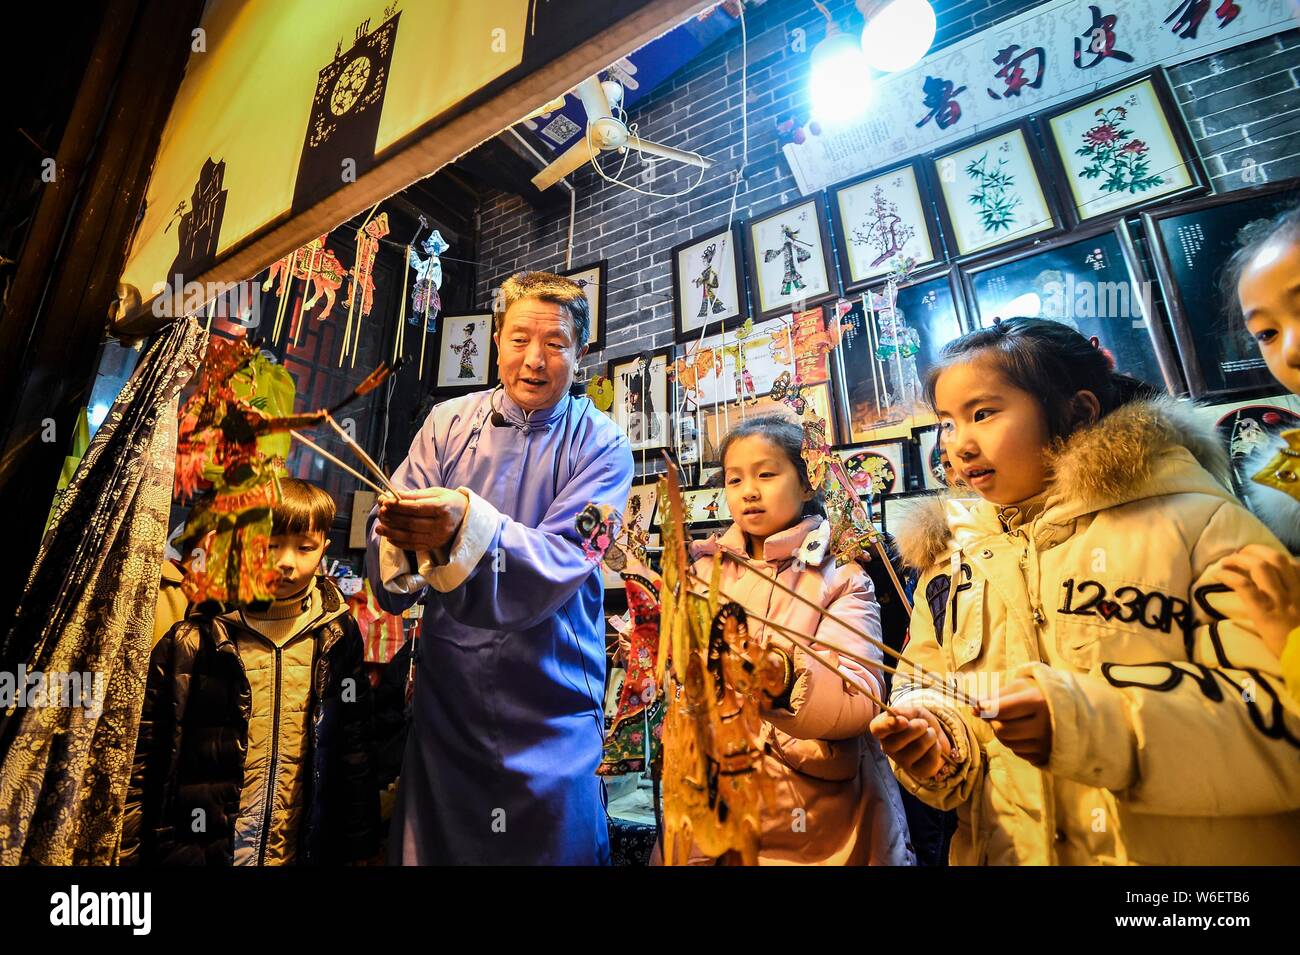 60-year-old Chinese folk artist Chen Shouke teaches children to perform shadow play or shadow puppetry, also known as shadow puppet, in Tai'erzhuang d Stock Photo